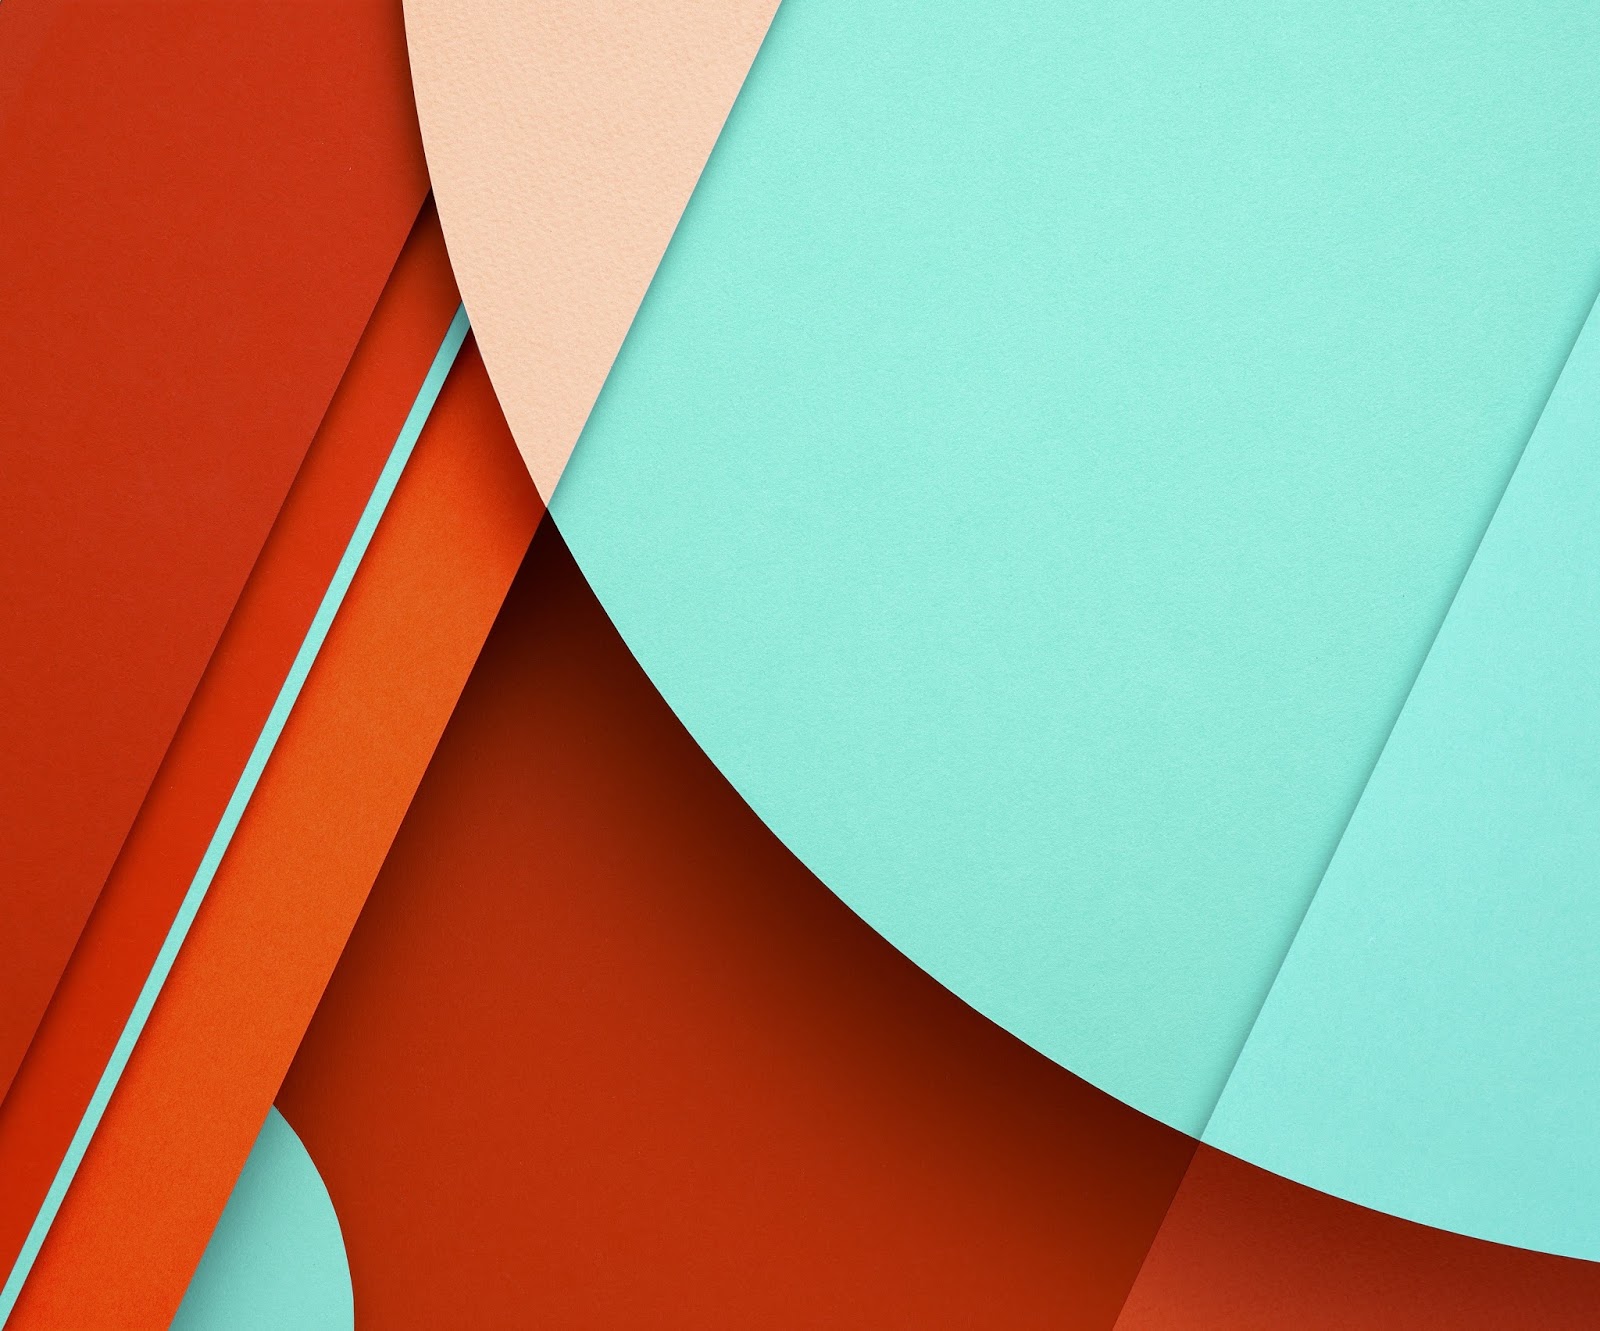 1.Android M wallpaper